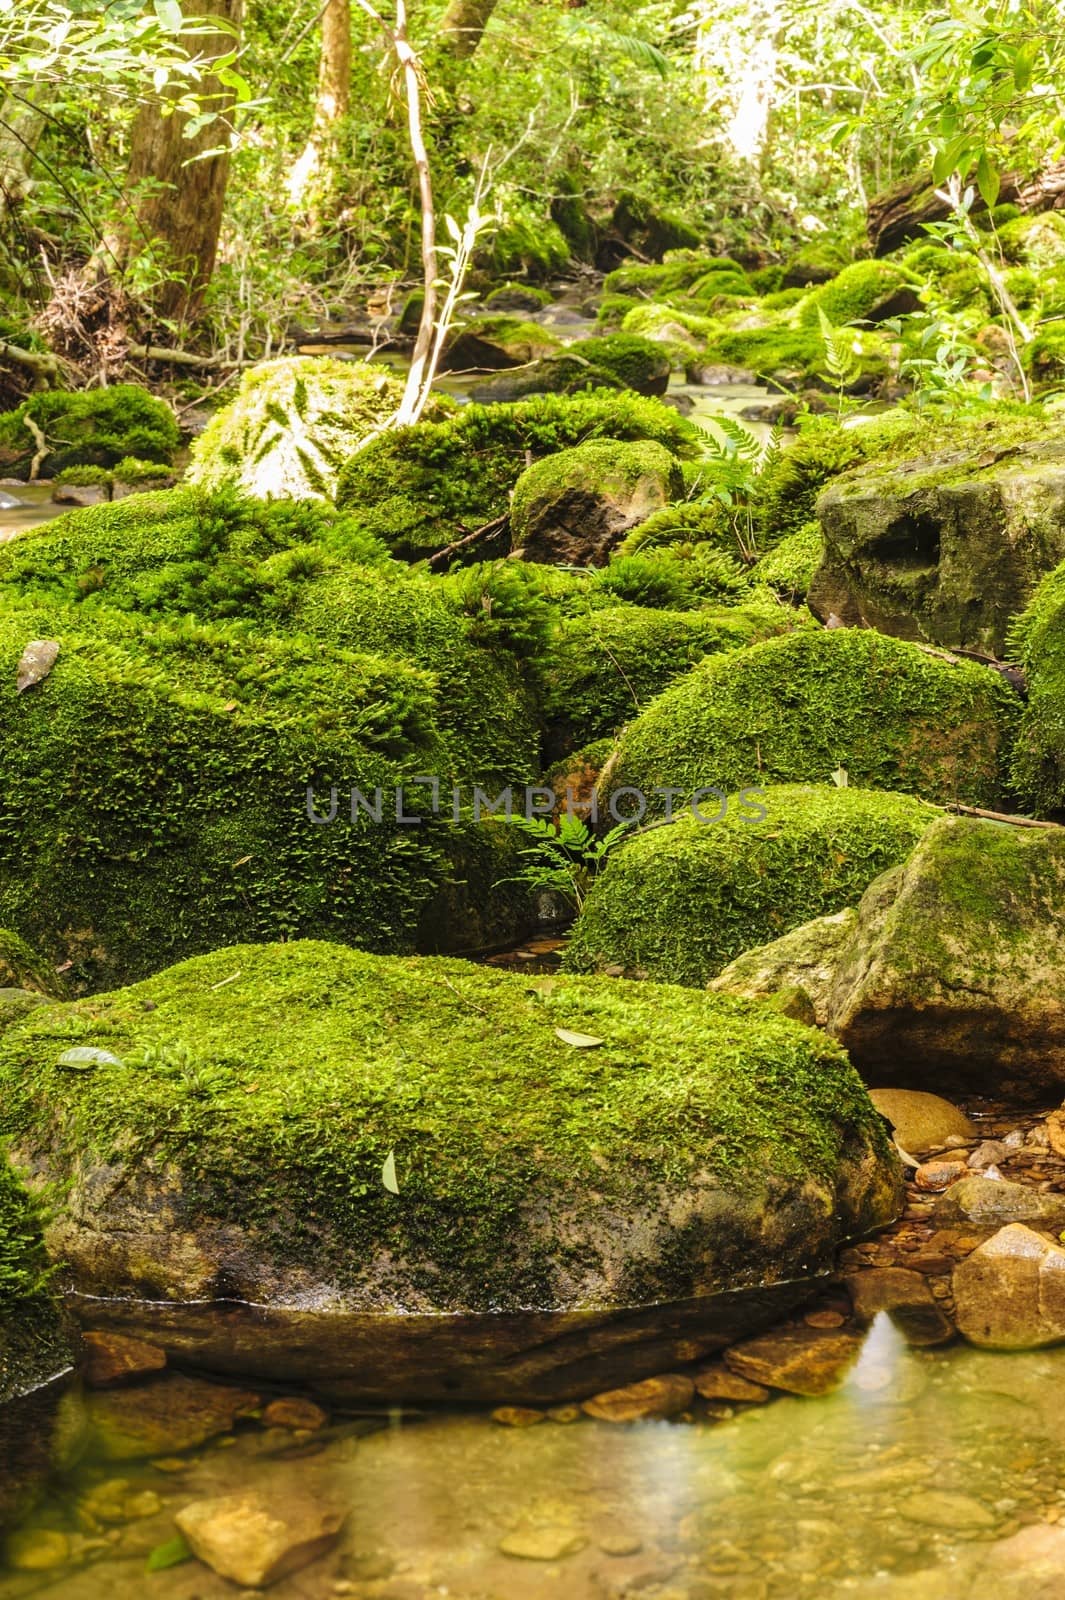 Moss covered rocks near wallterfall in in  a green wild tropical by ngungfoto